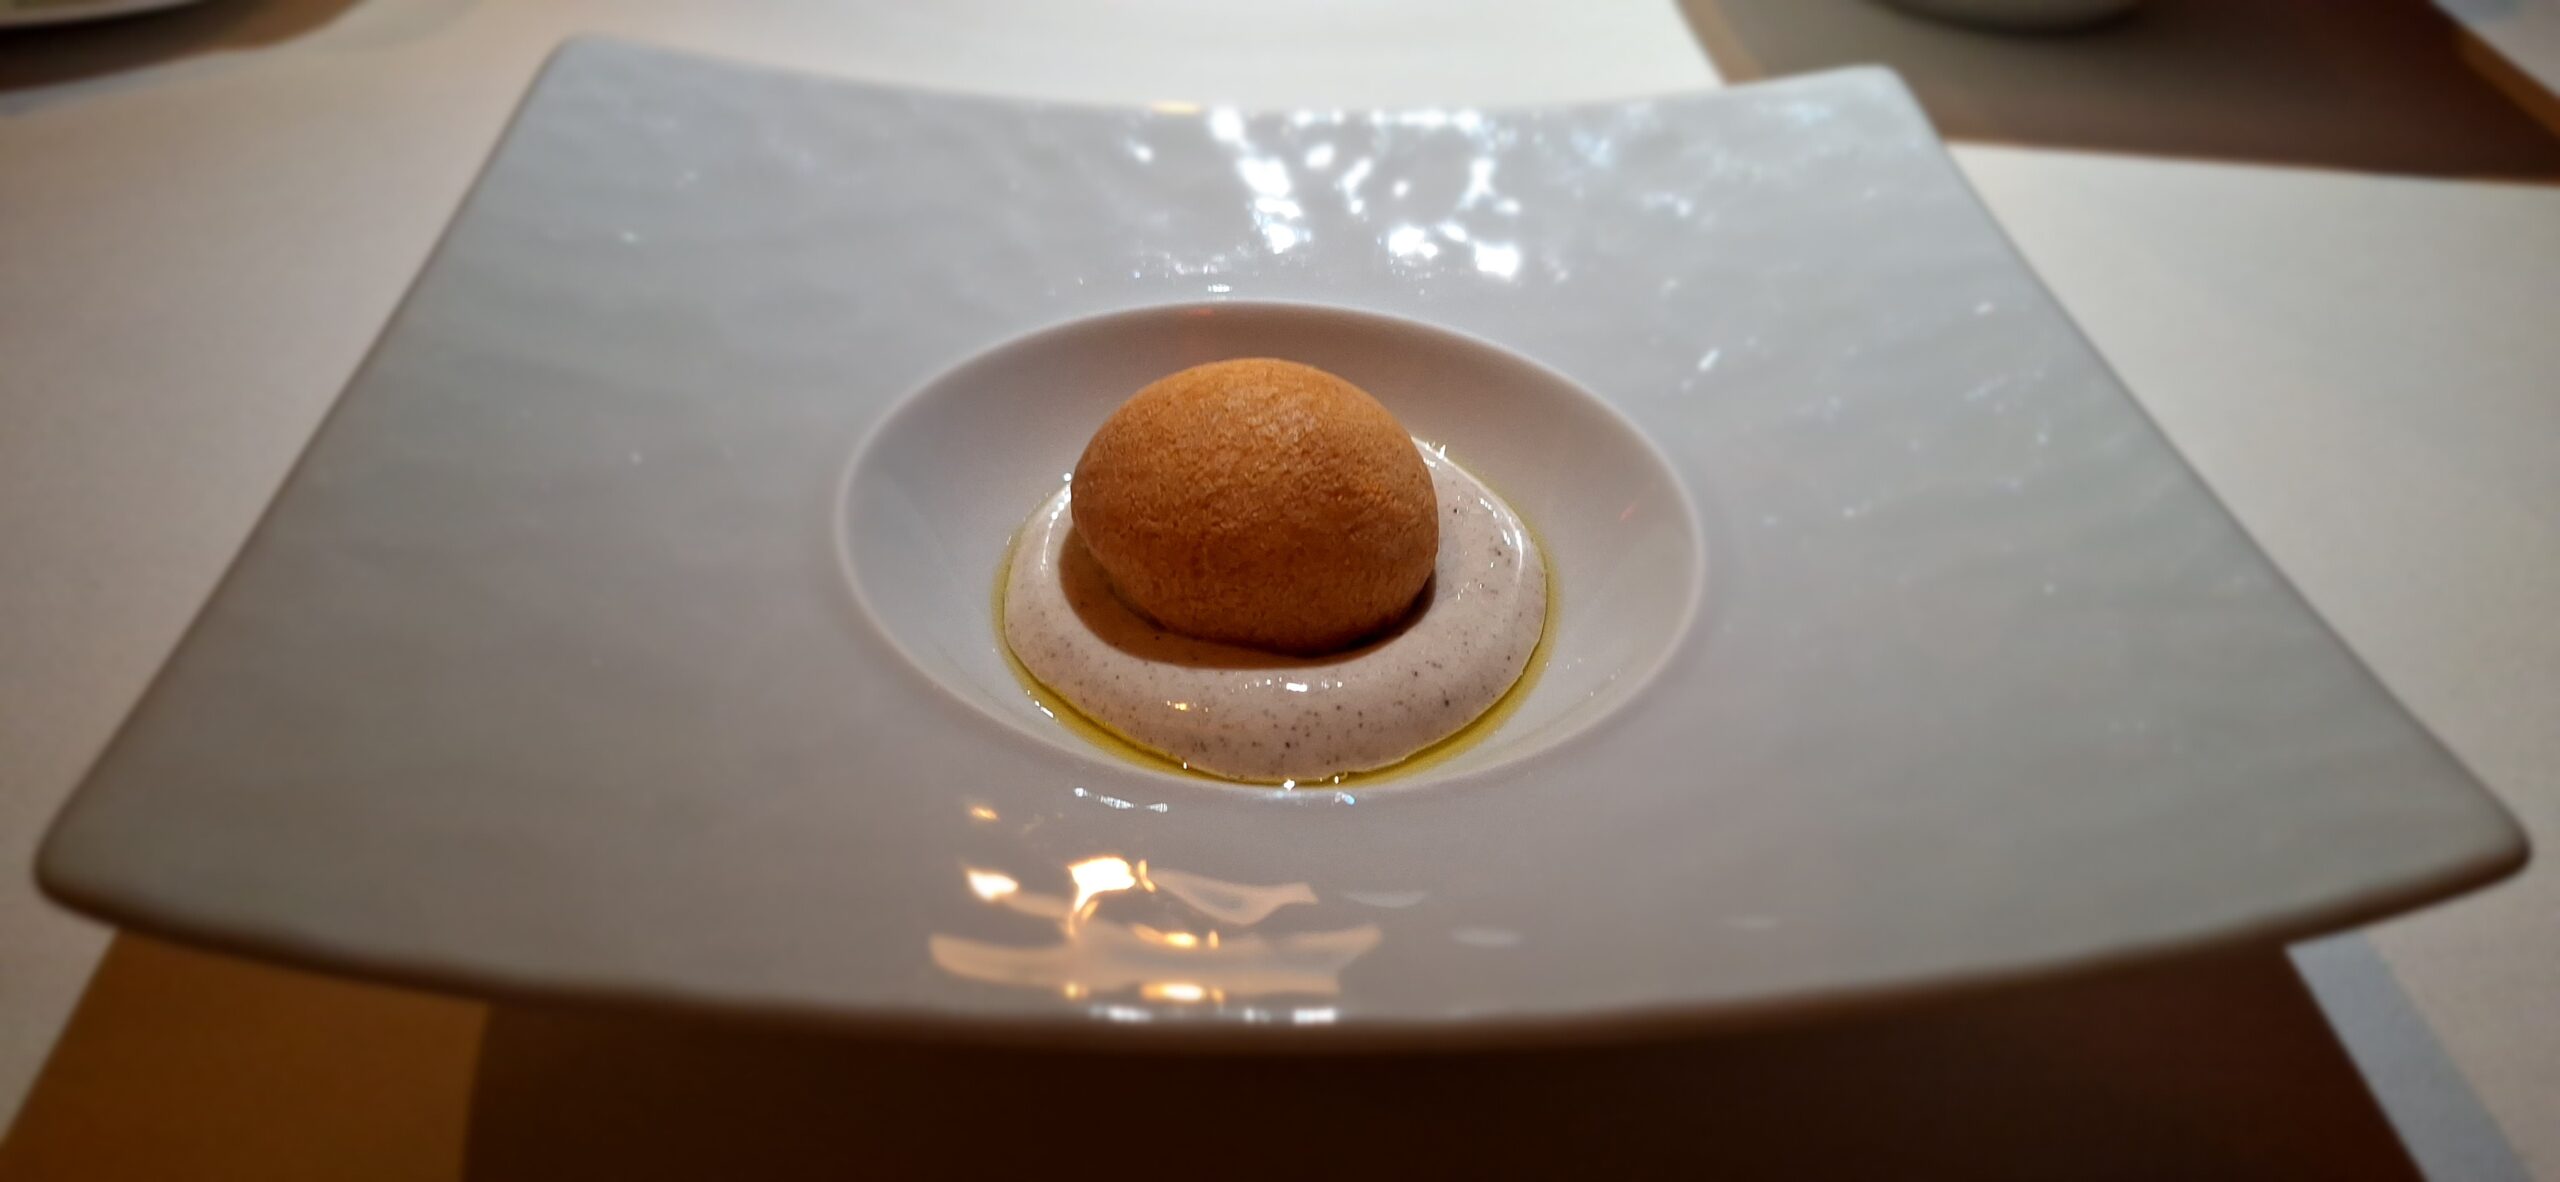 a round brown object on a white plate